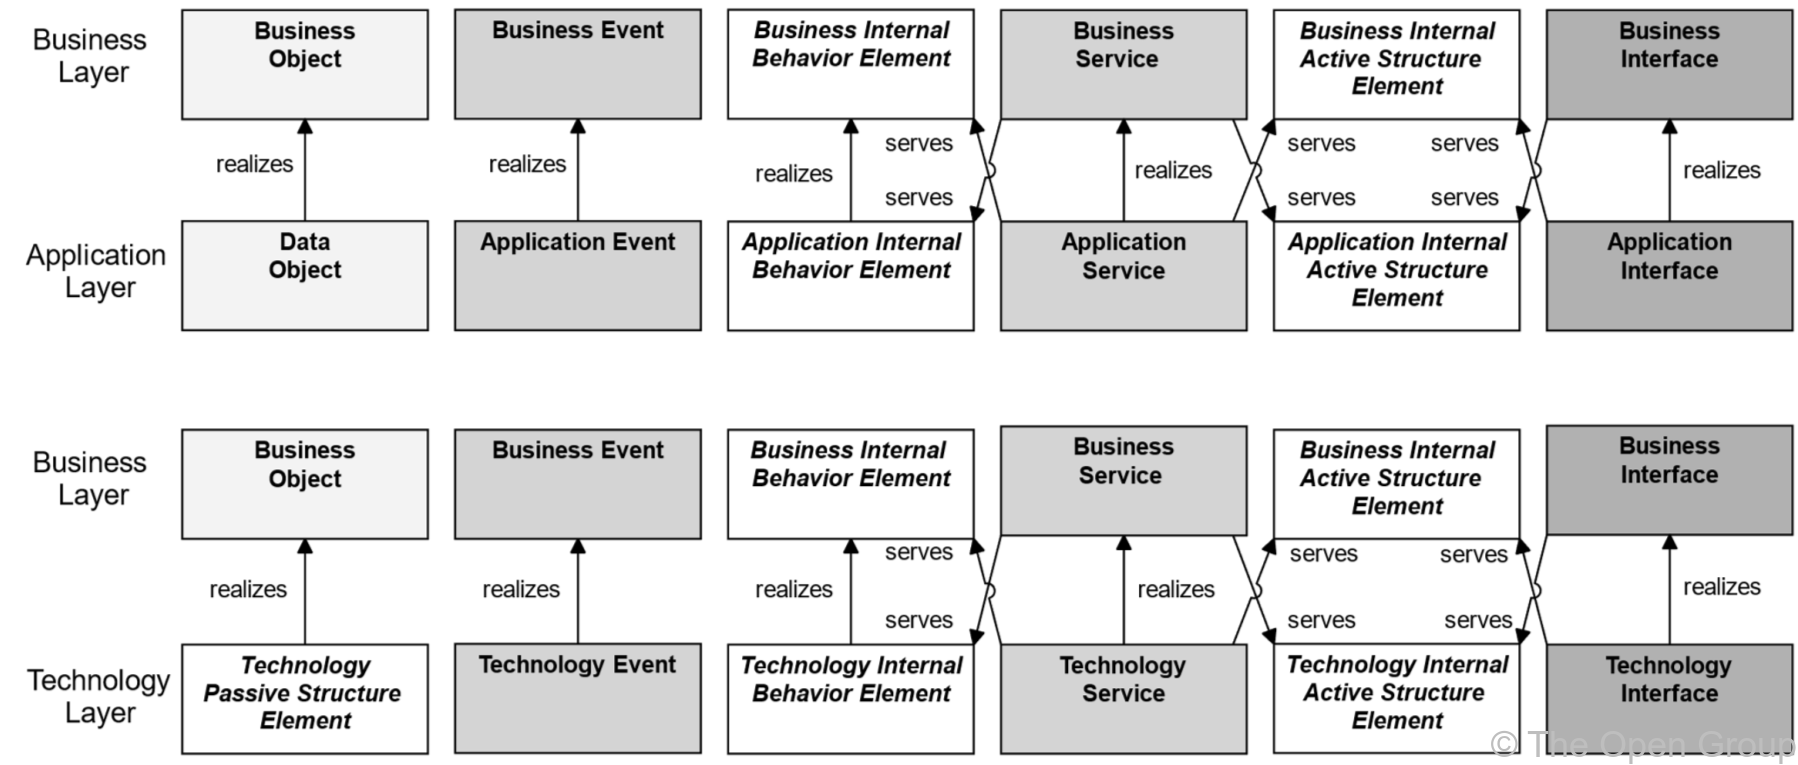 fig Relationships Between Business Layer and Application and Technology Layer Elements